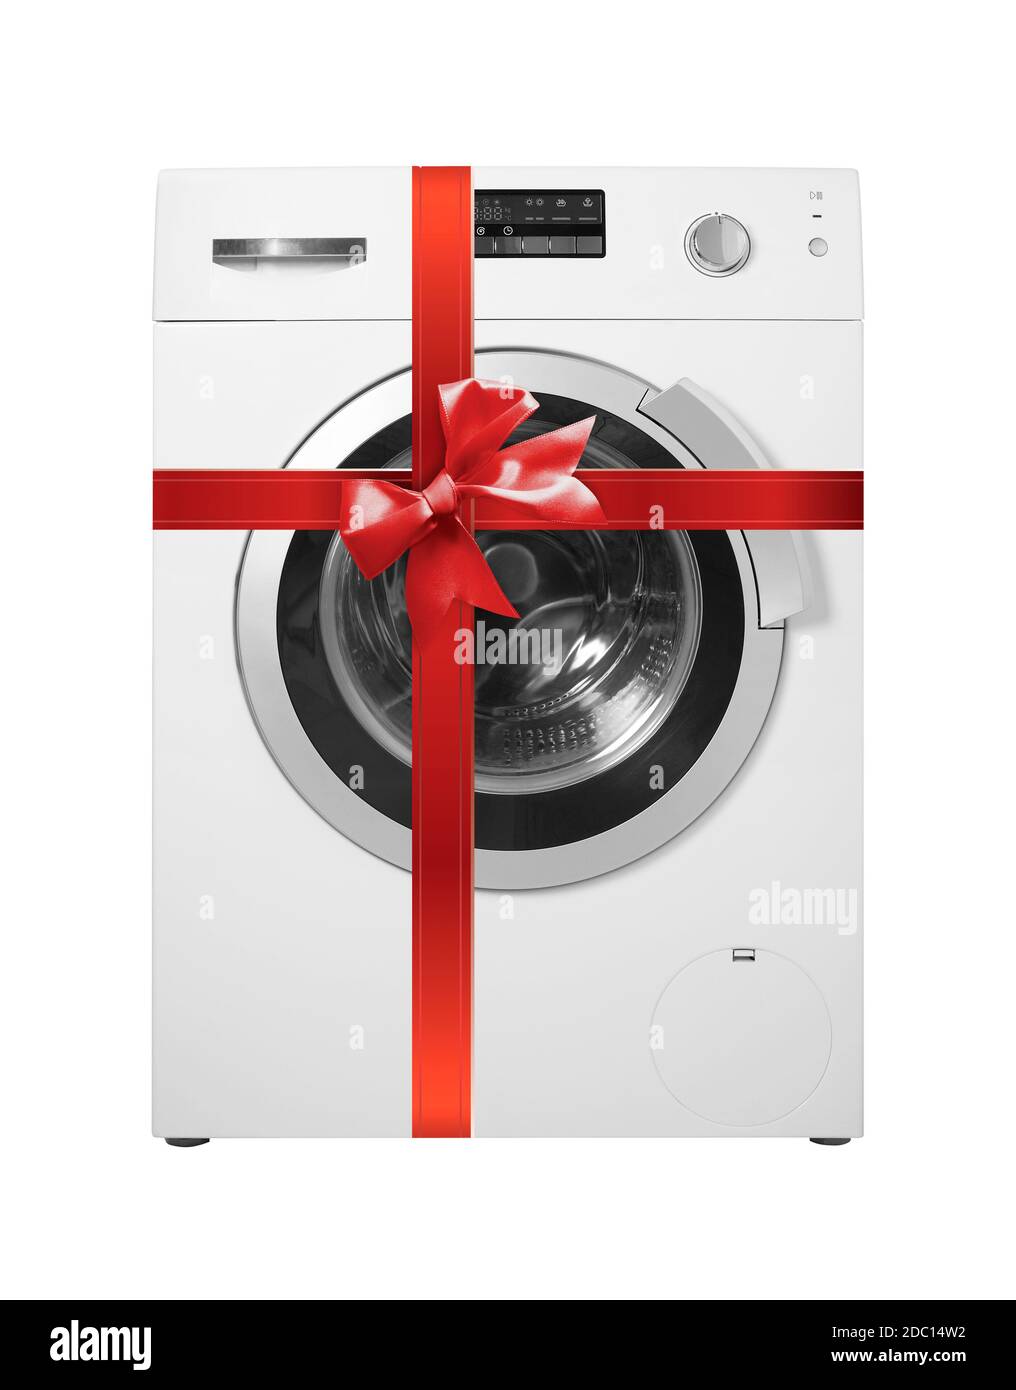 Major appliance - Front view washing machine gift tied red bow isolated on a white background Stock Photo